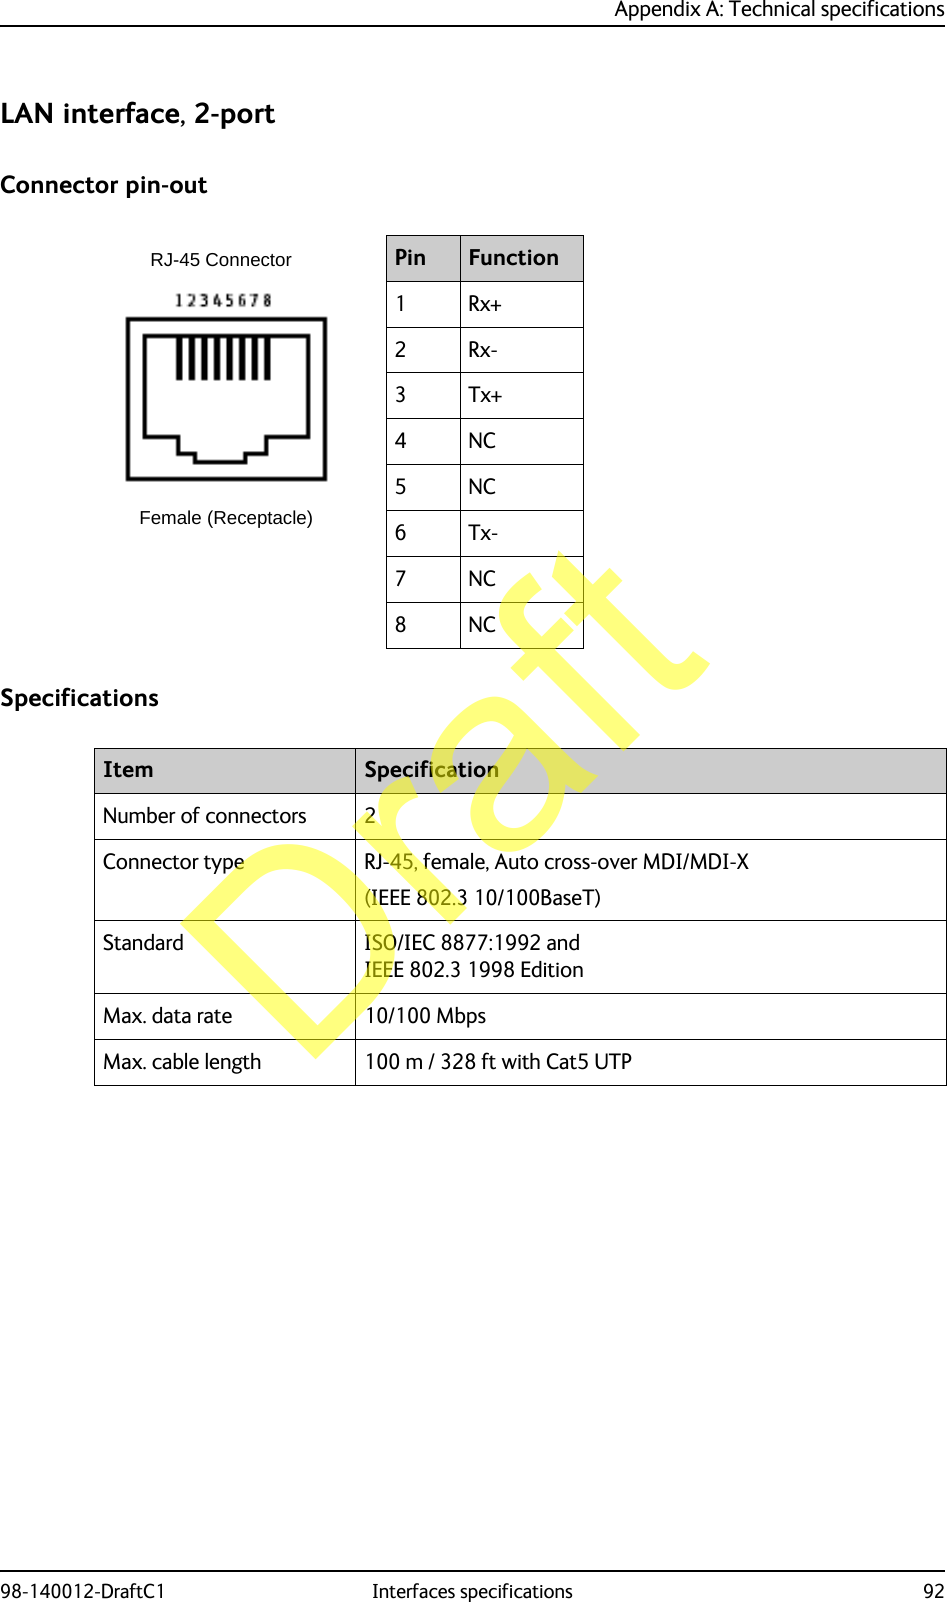 Appendix A: Technical specifications98-140012-DraftC1 Interfaces specifications 92LAN interface, 2-portConnector pin-outSpecificationsPin Function1Rx+2Rx-3Tx+4NC5NC6Tx-7NC8NCRJ-45 ConnectorFemale (Receptacle)Item SpecificationNumber of connectors 2Connector type RJ-45, female, Auto cross-over MDI/MDI-X (IEEE 802.3 10/100BaseT)Standard ISO/IEC 8877:1992 and IEEE 802.3 1998 EditionMax. data rate 10/100 MbpsMax. cable length 100 m / 328 ft with Cat5 UTPDraft